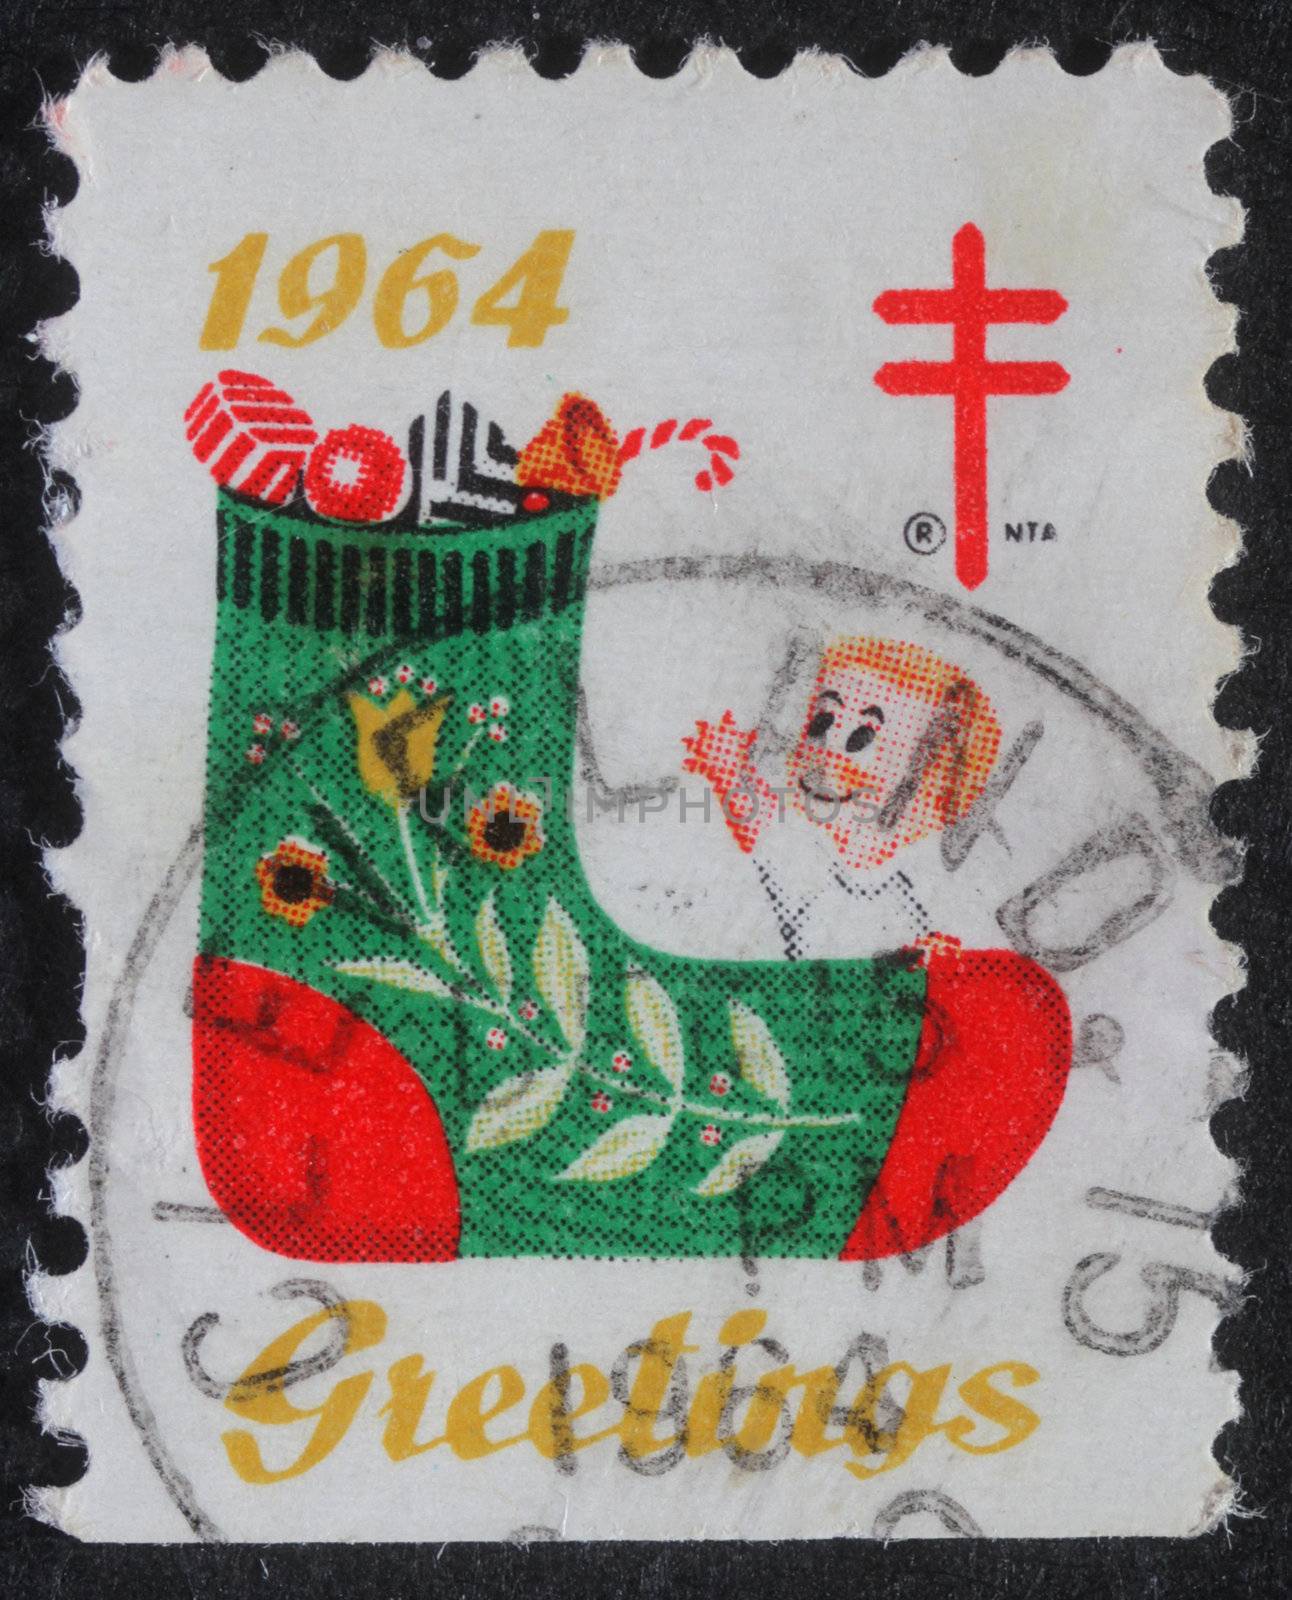 UNITED STATES OF AMERICA - CIRCA 1964: A greeting Christmas stamp printed in the USA shows a stocking with gifts